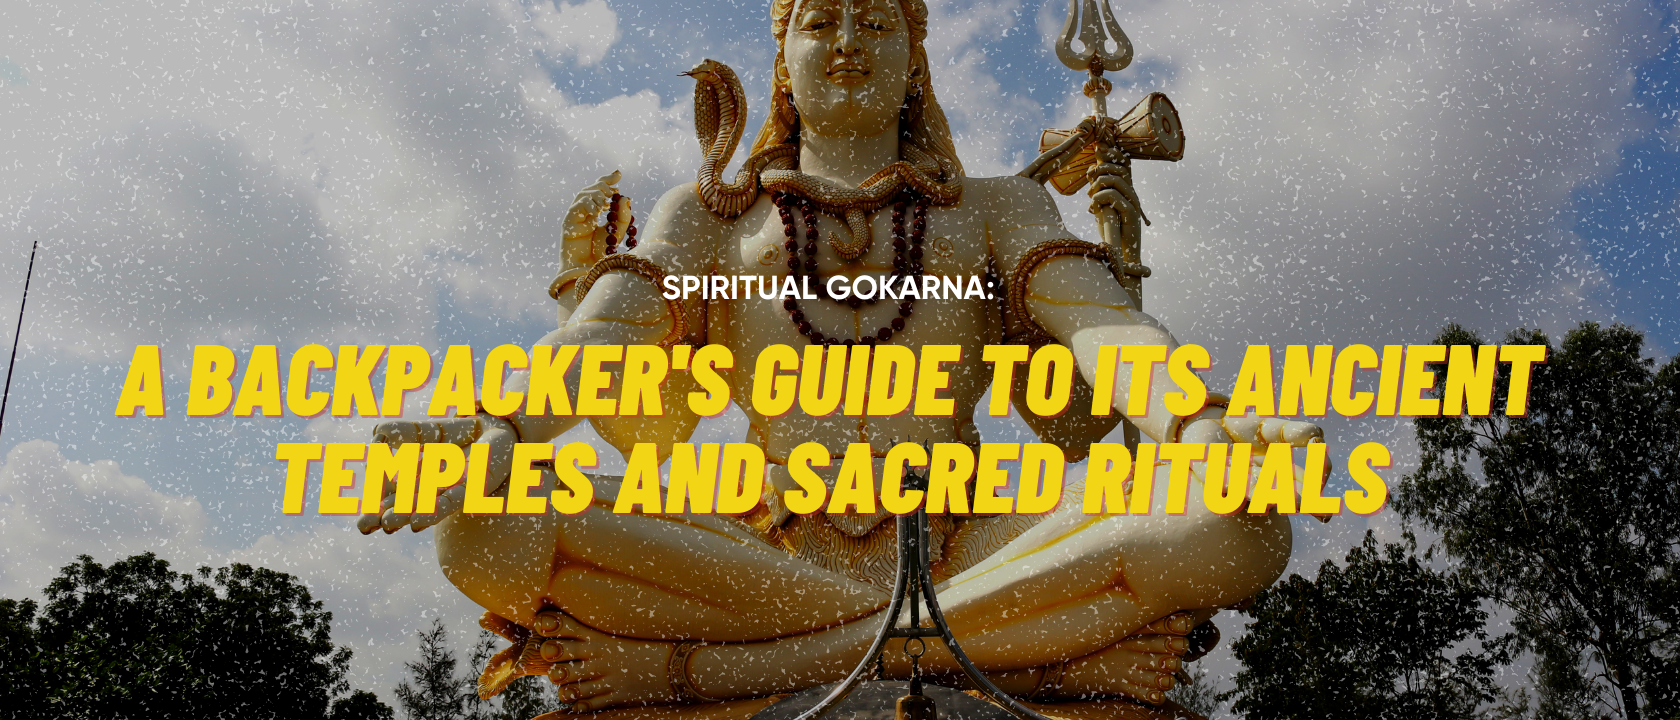 A Backpackers Guide to Its Ancient Temples and Sacred Rituals - Gokarna